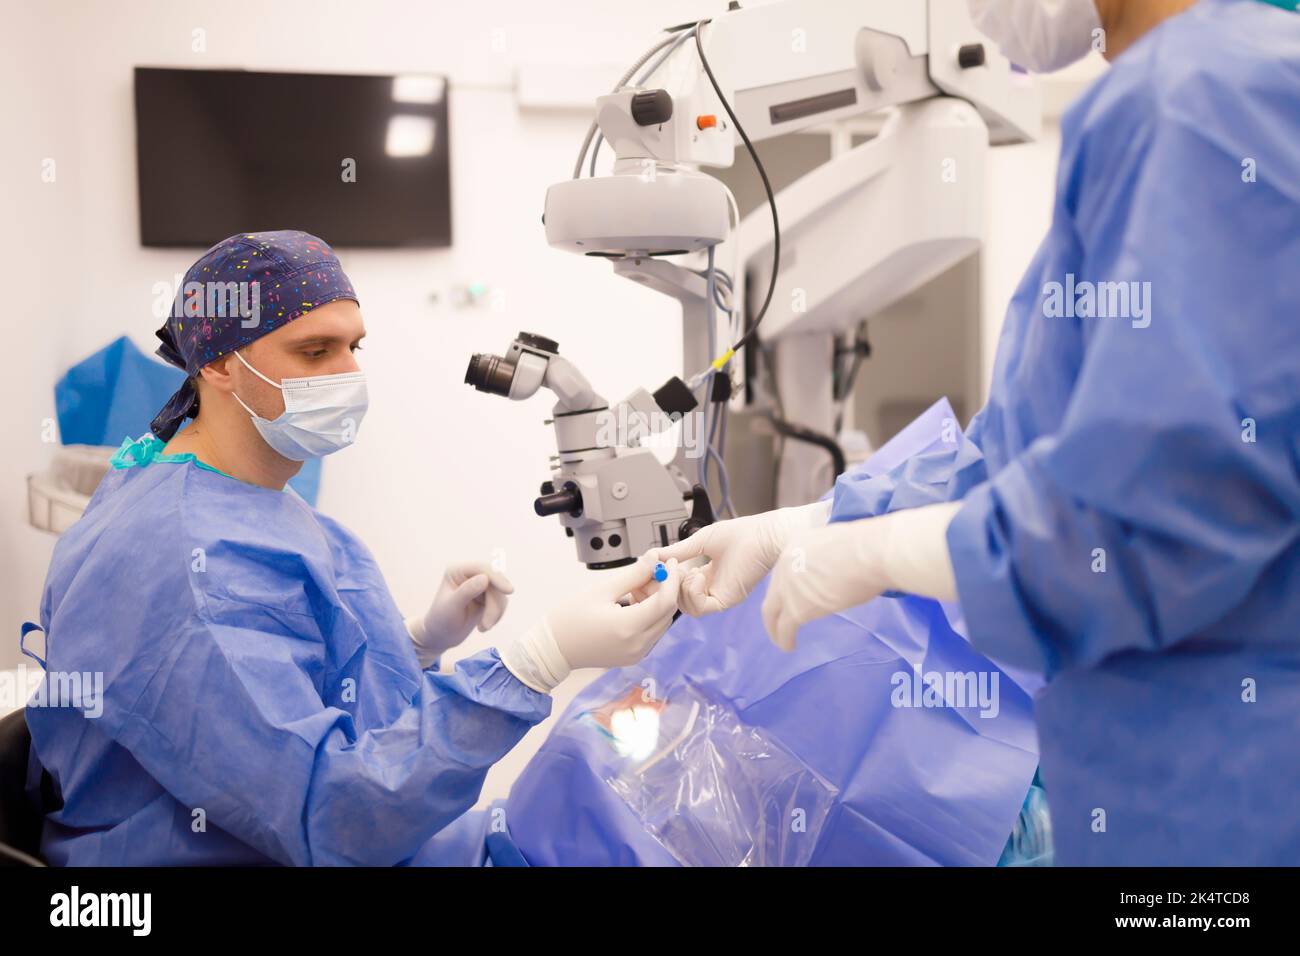 Doctor and an assistant perform a professional operation Stock Photo